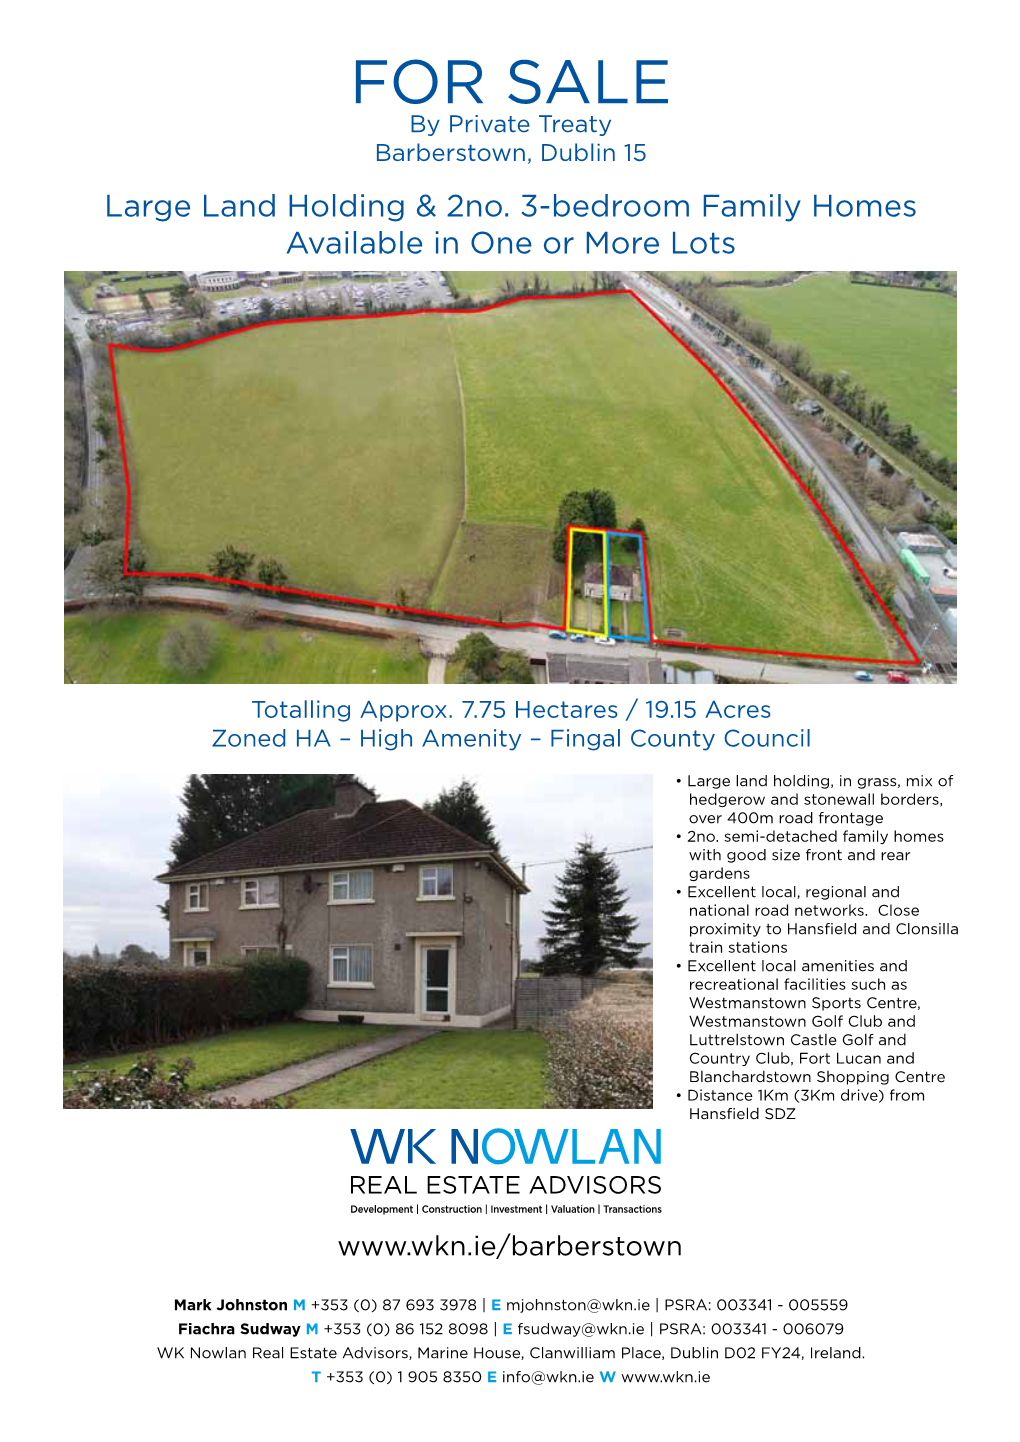 FOR SALE by Private Treaty Barberstown, Dublin 15 Large Land Holding & 2No